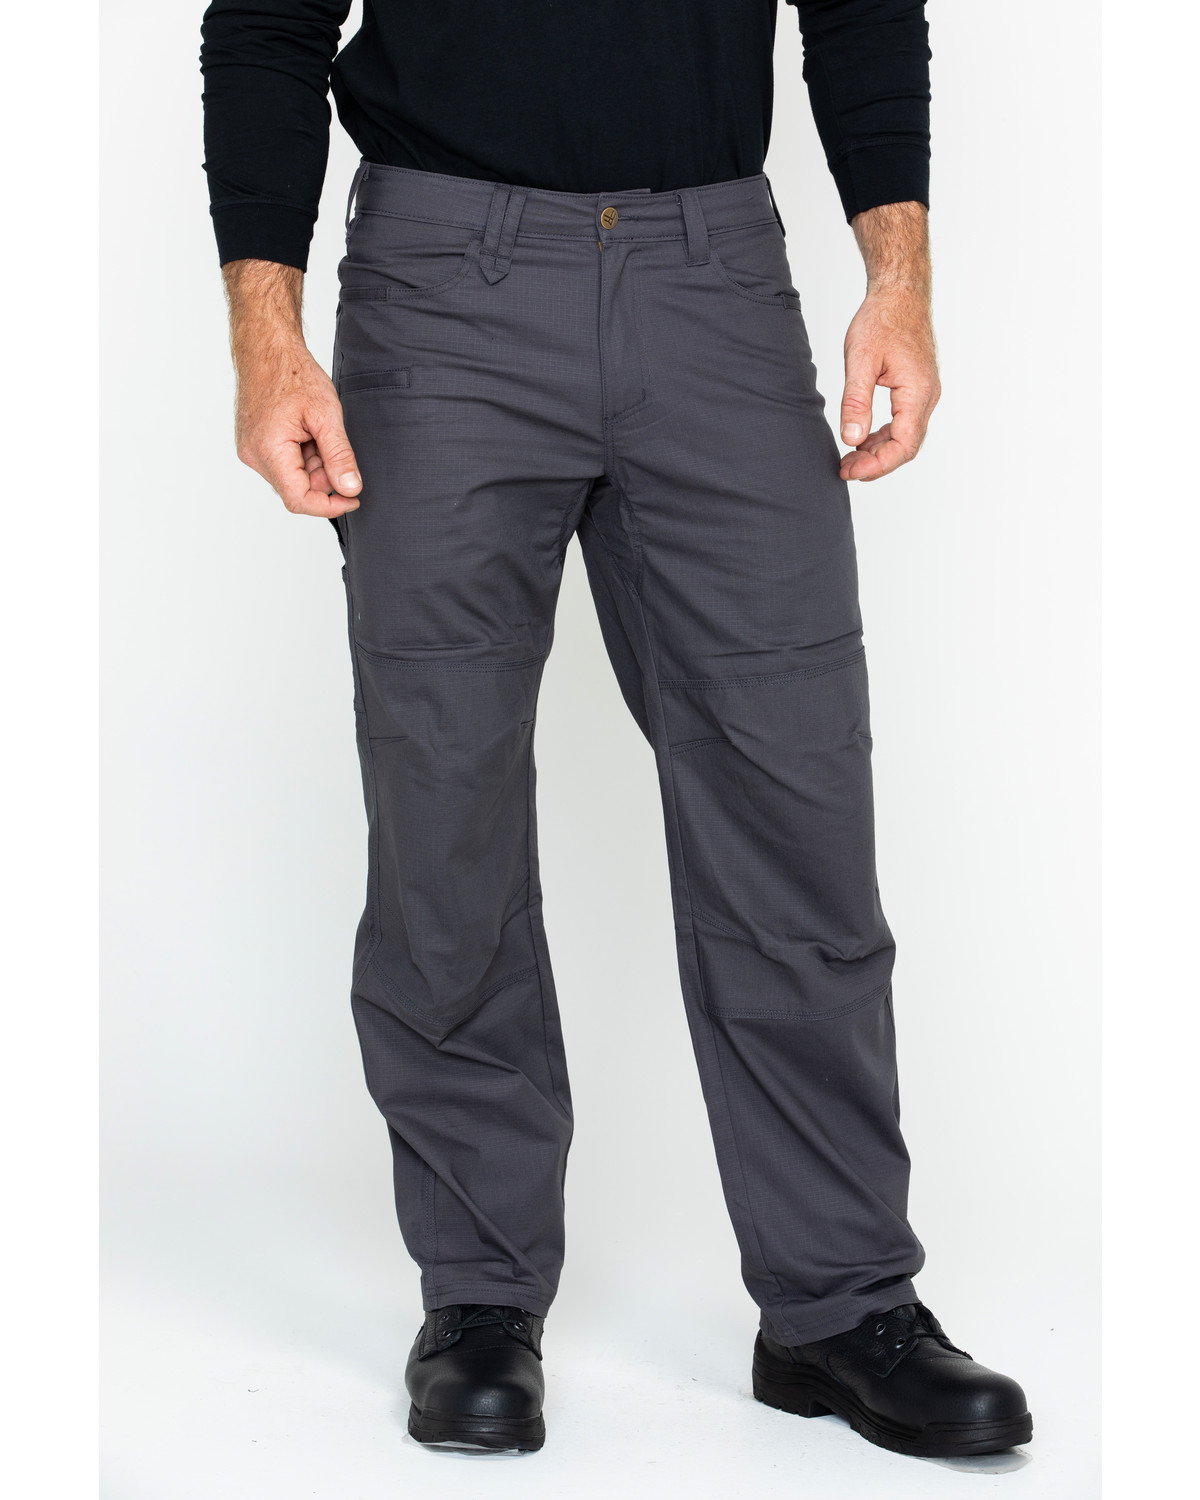 Hawx Men's Stretch Ripstop Utility Work Pants - Country Outfitter